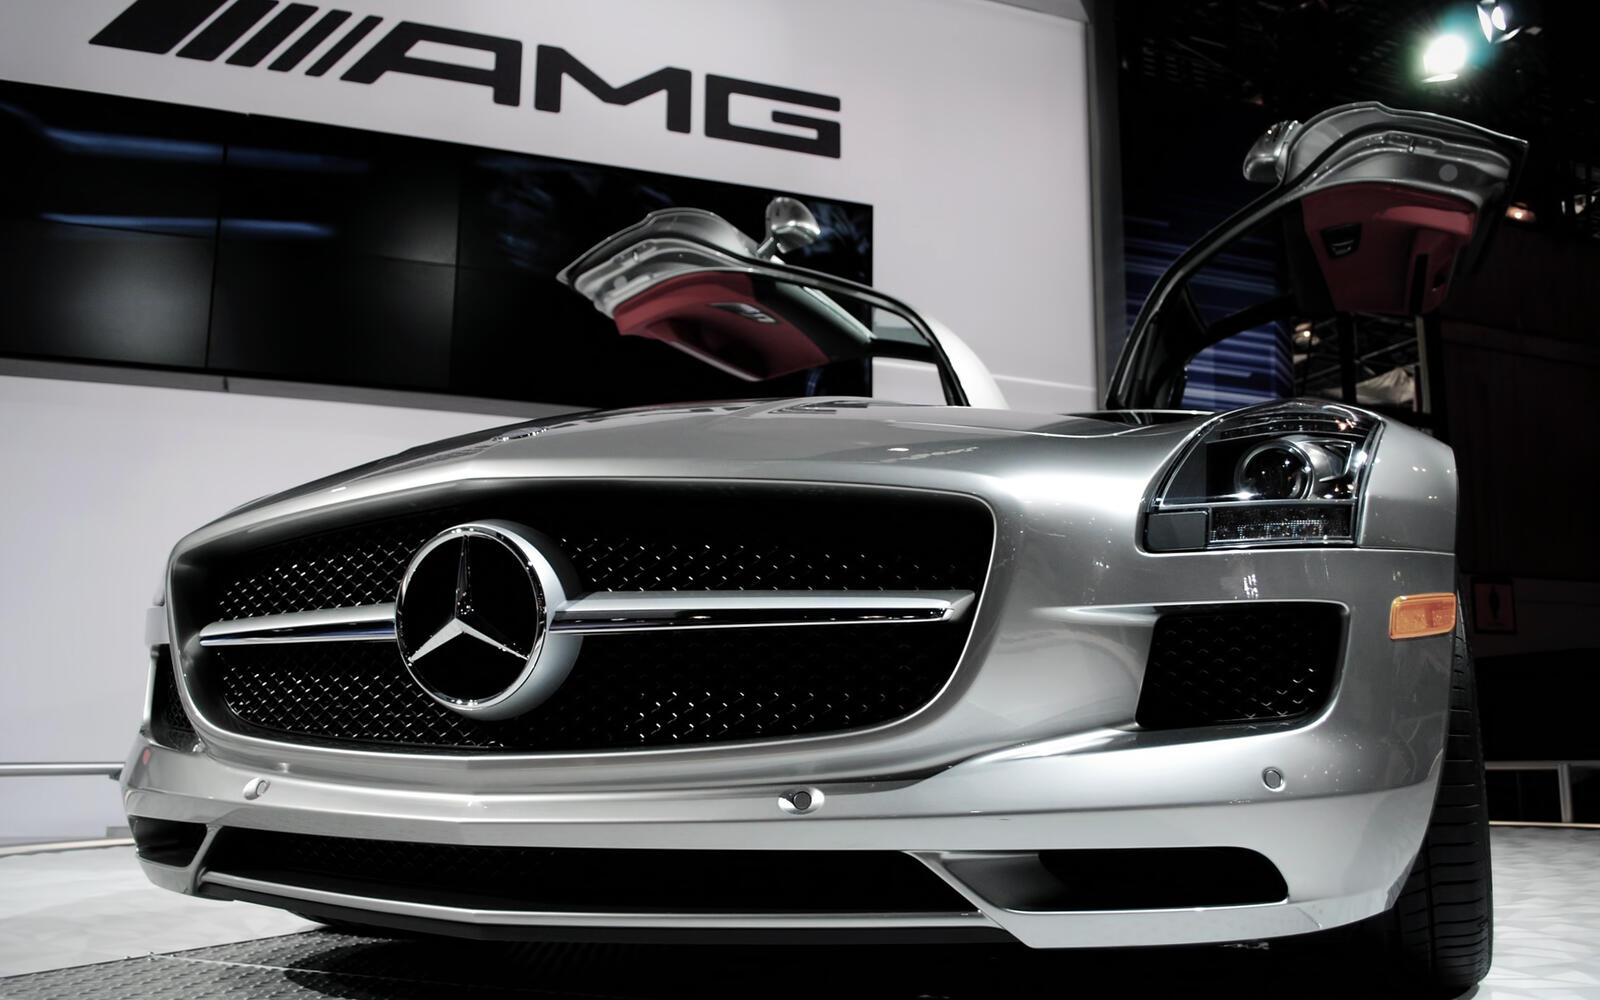 Wallpapers Mercedes amg interior on the desktop